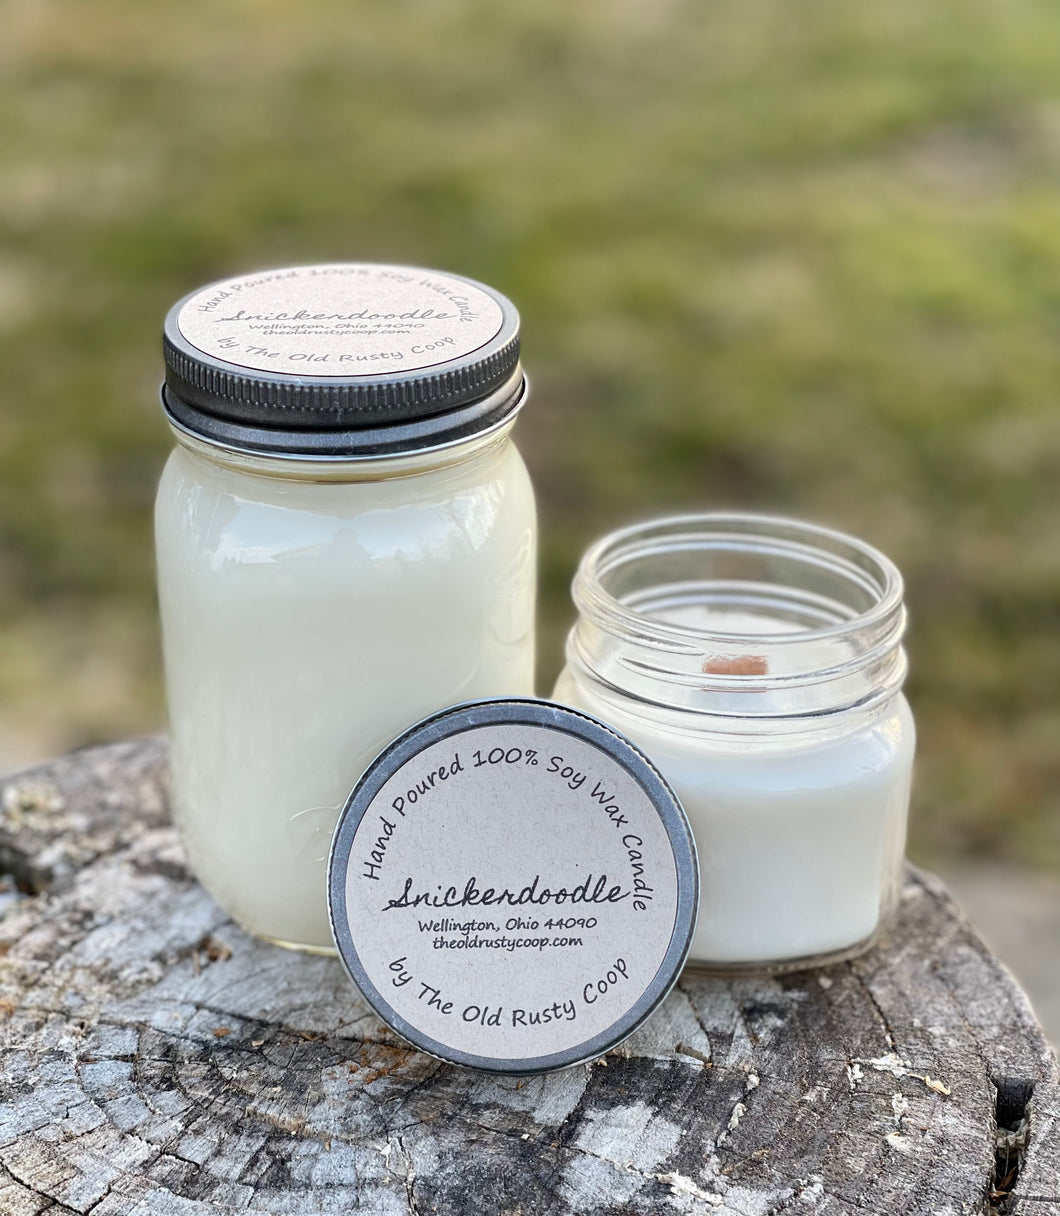 Snickerdoodle ~ Hand Poured 100% Soy Wax Wooden Wick Candle